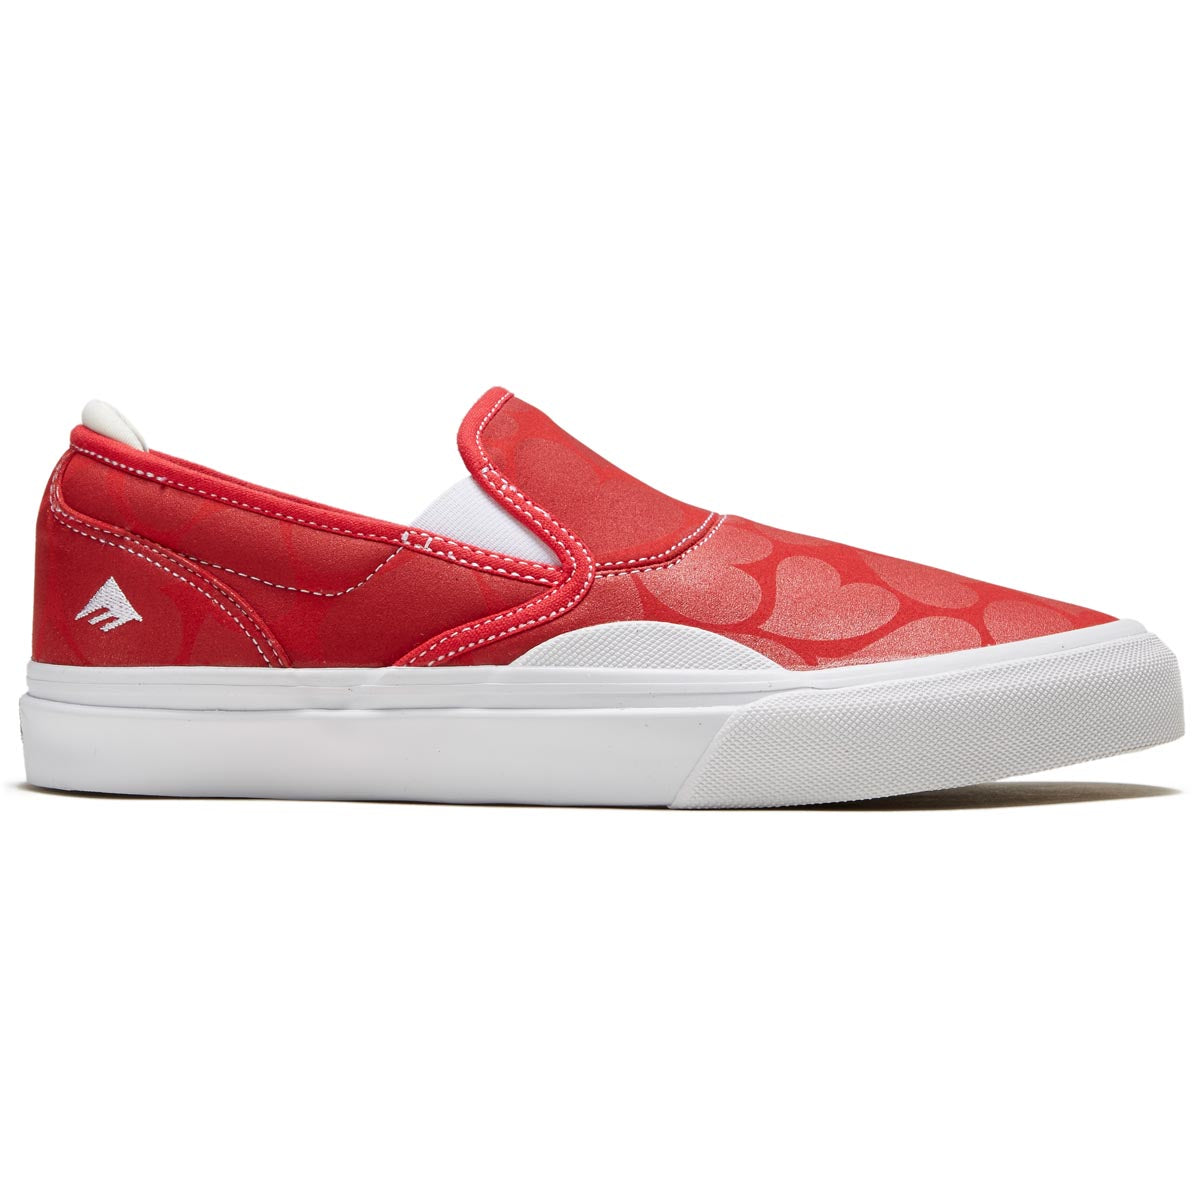 Emerica Wino G6 Slip-on Shoes - Red/White – CCS